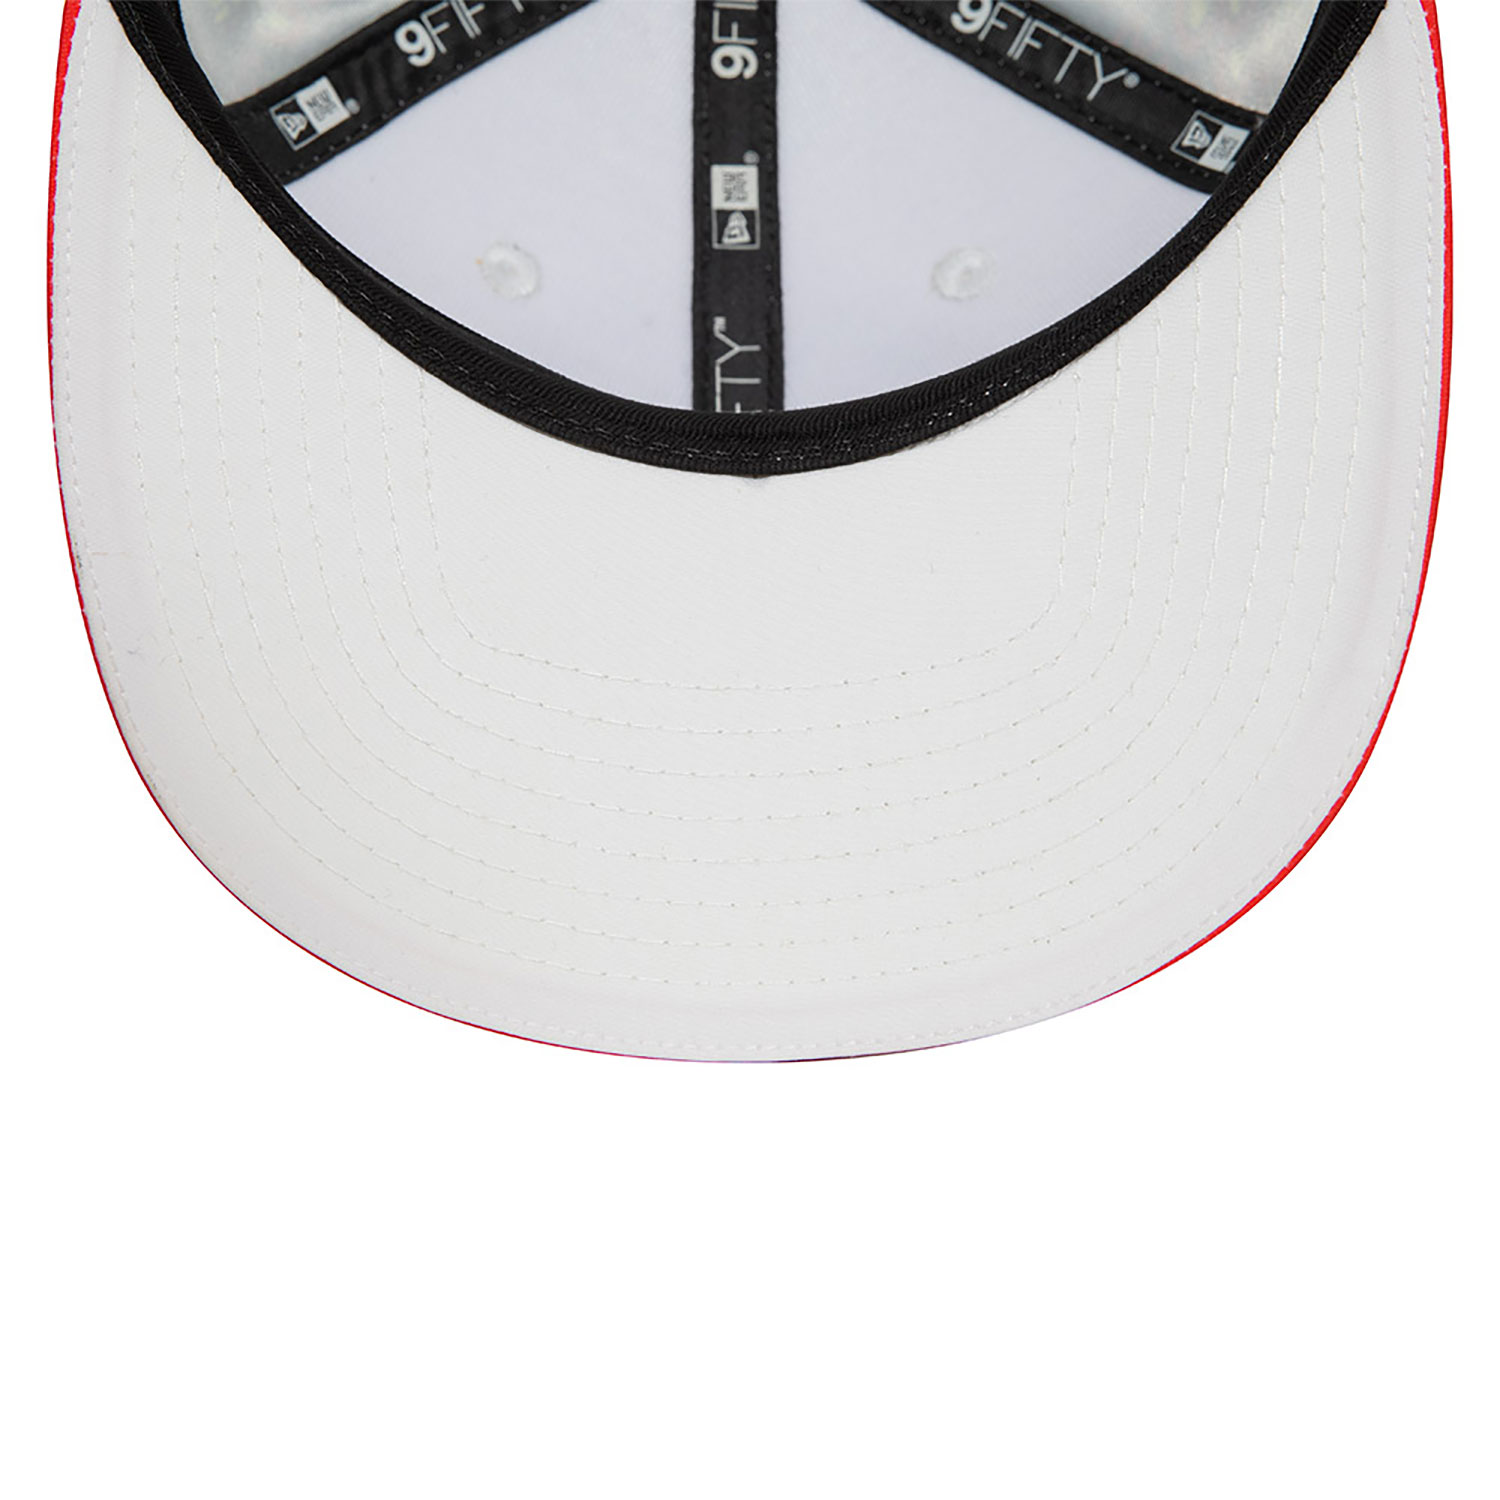 Alpine Mexico Race Special White 9FIFTY Snapback Cap